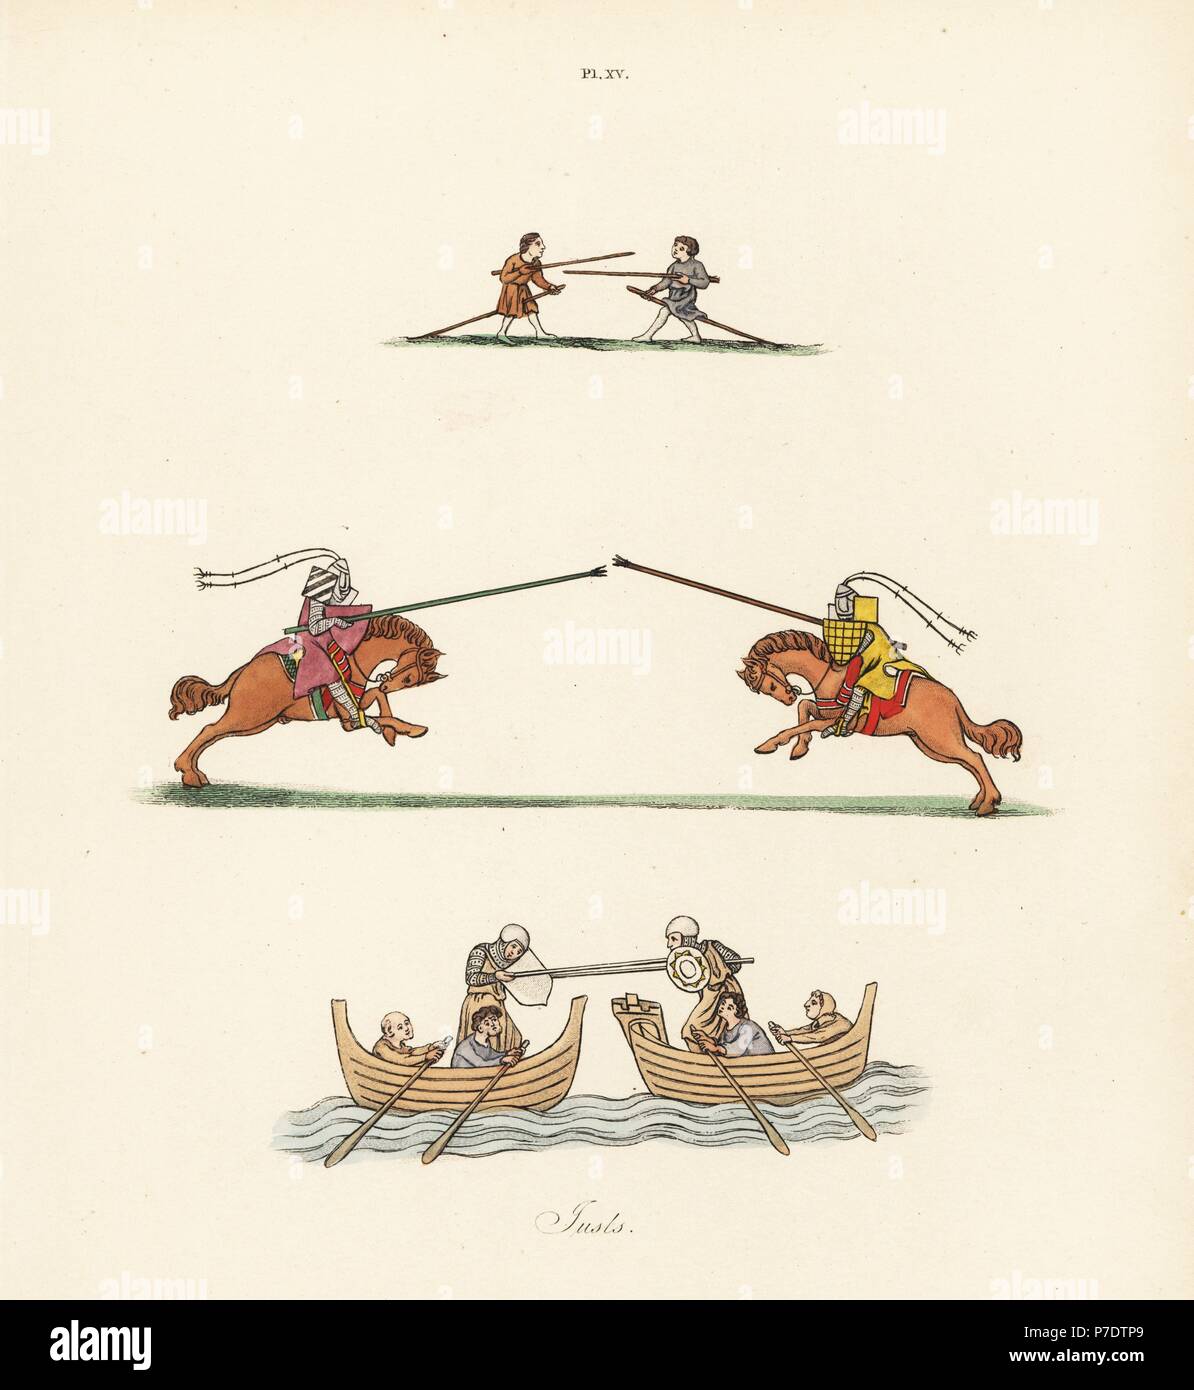 Boys playing at tilting with lances and poles, mounted knights jousting with lances, and knights tilting on rowboats, 14th century. Handcoloured lithograph by Joseph Strutt from his own Sports and Pastimes of the People of England, Chatto and Windus, London, 1876. Stock Photo